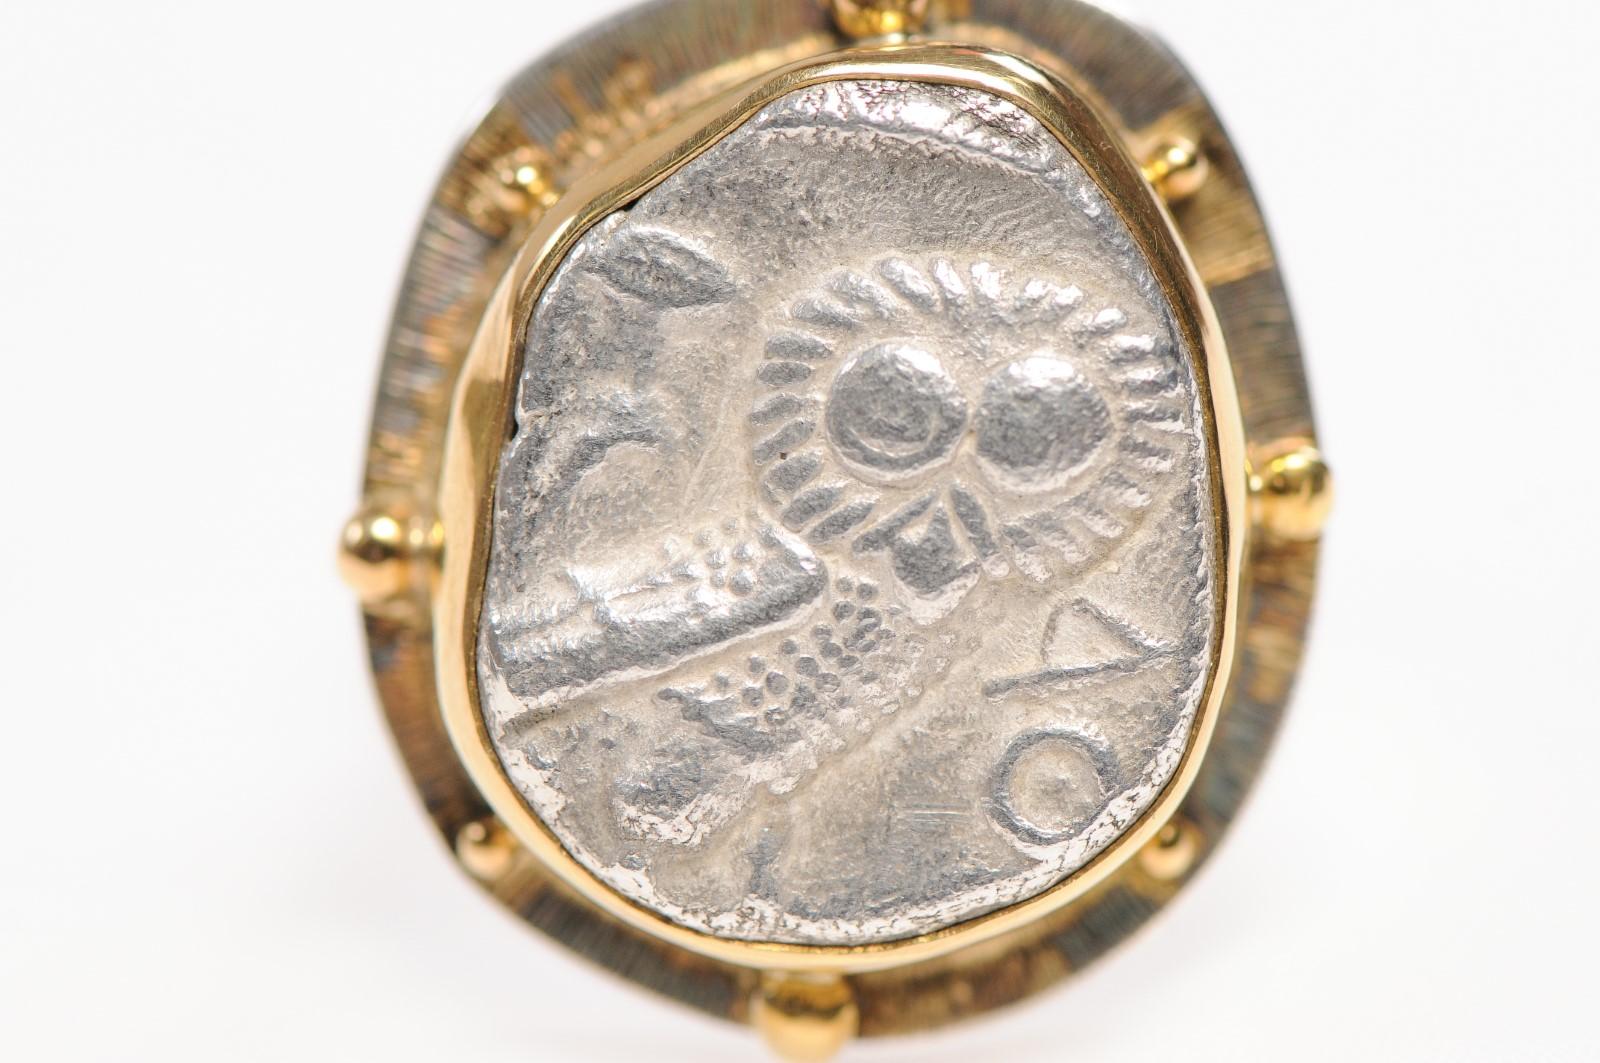 An authentic Attica, Athens, Silver Tetradrachm Coin (circa 350-300 BC) ring. This Greek coin with Owl featured prominently has been set in a custom custom ring with a 22k gold and sterling silver bezel (with balled accents) and a sterling silver